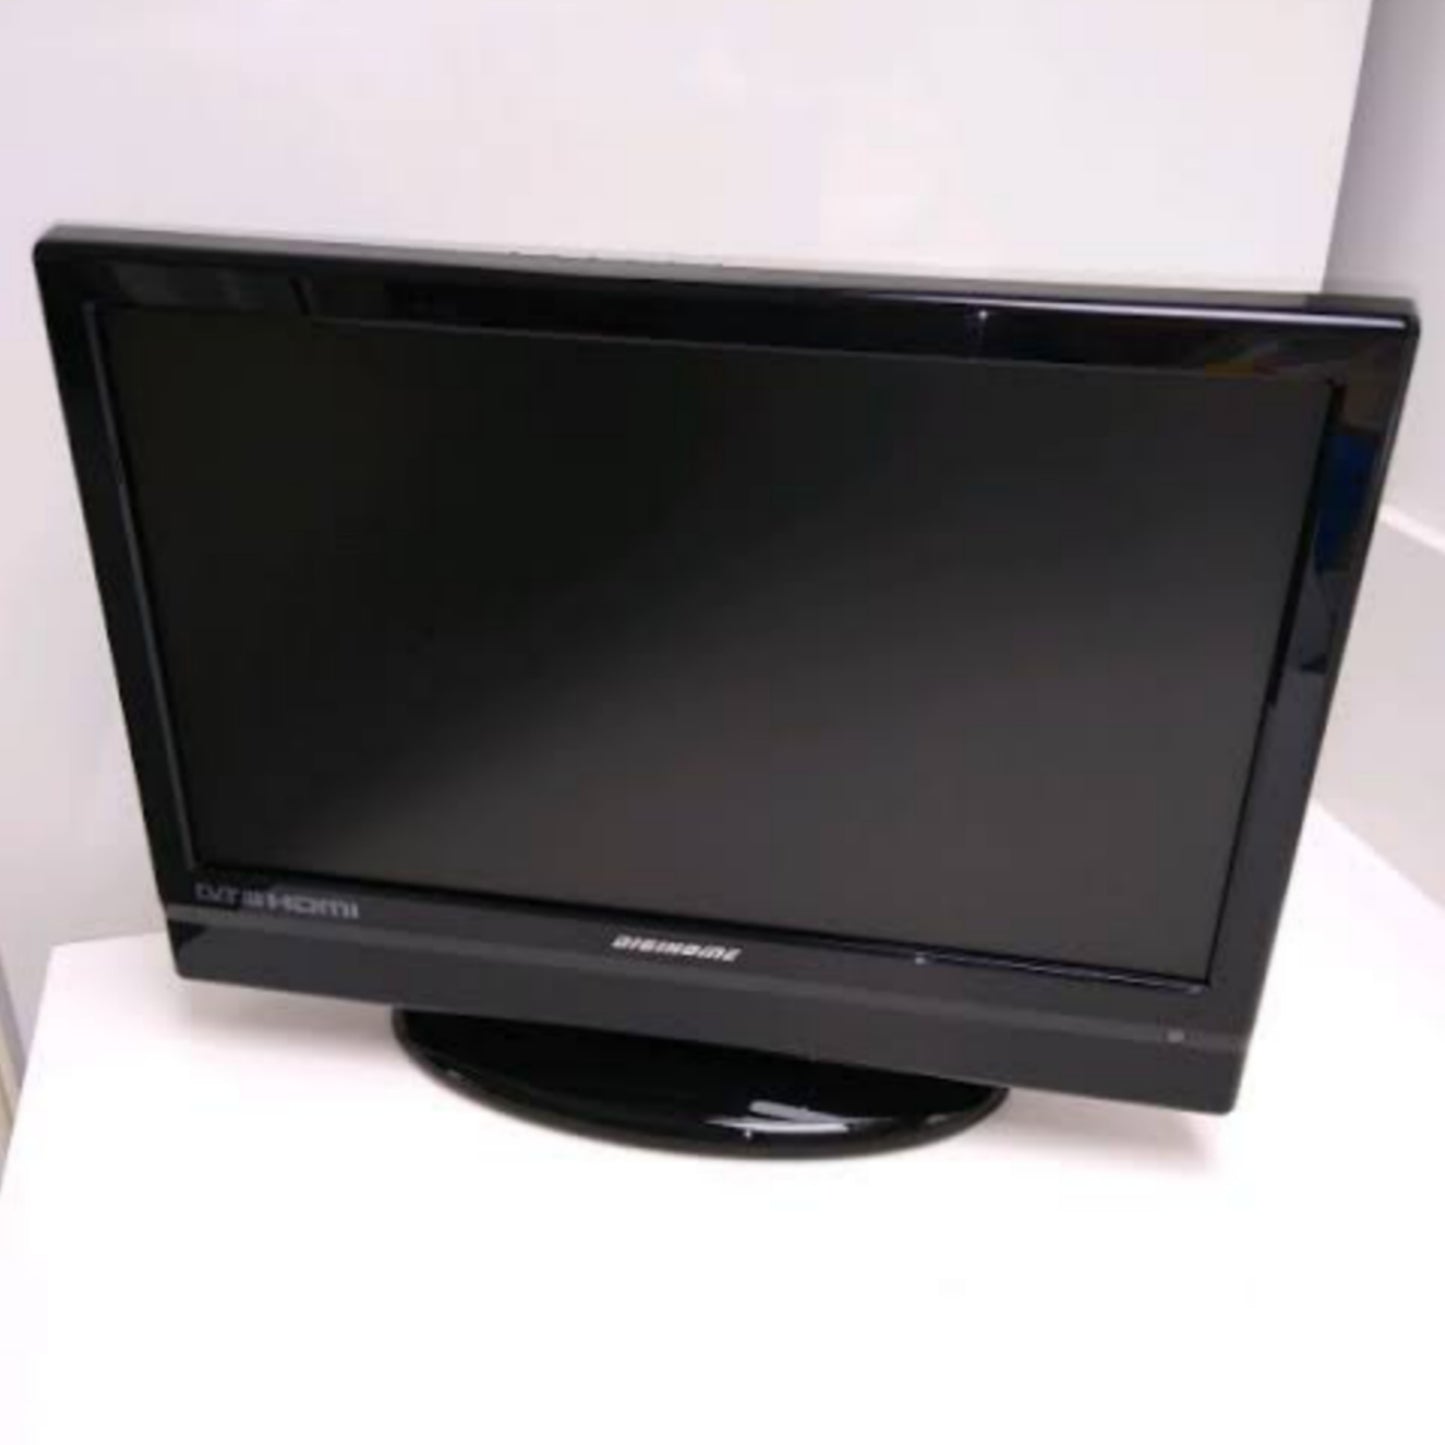 Digihome 16 Inch HD Ready LCD TV - London Used